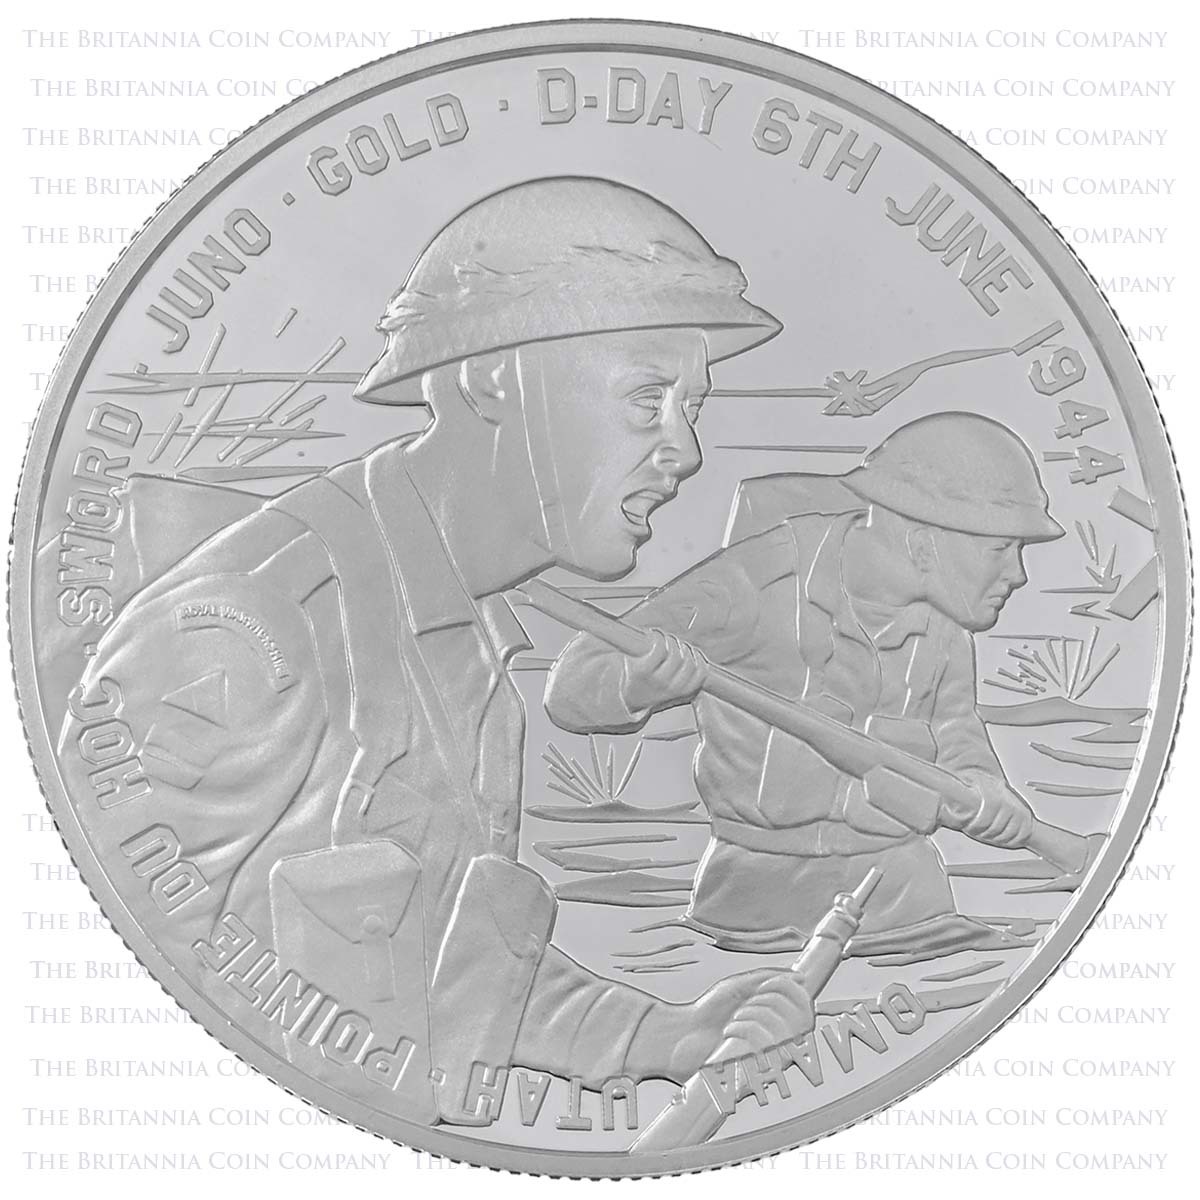 DD14SP 2014 Alderney D-Day 70th Anniversary £5 Crown Silver Proof Coin Reverse